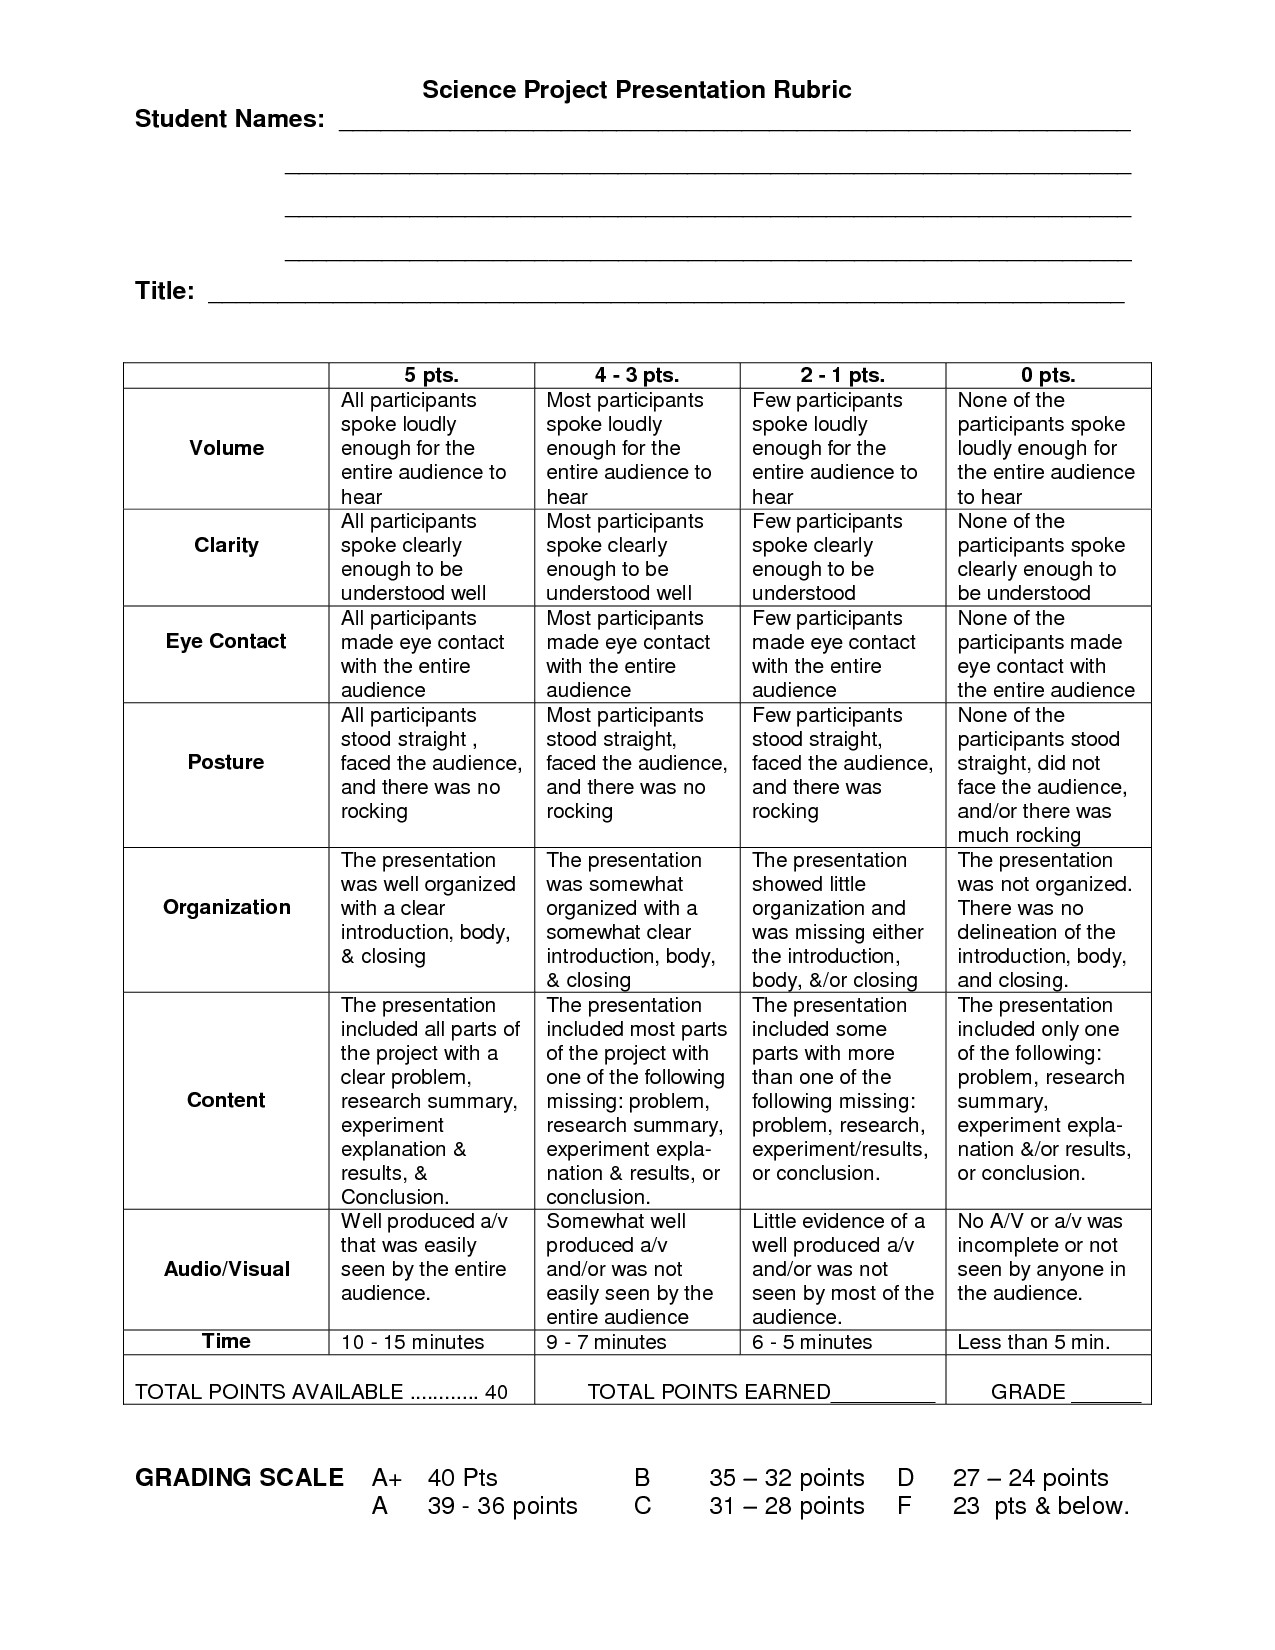 Science Project Rubric Template Auto Essay Writer Write Academic Papers for Money